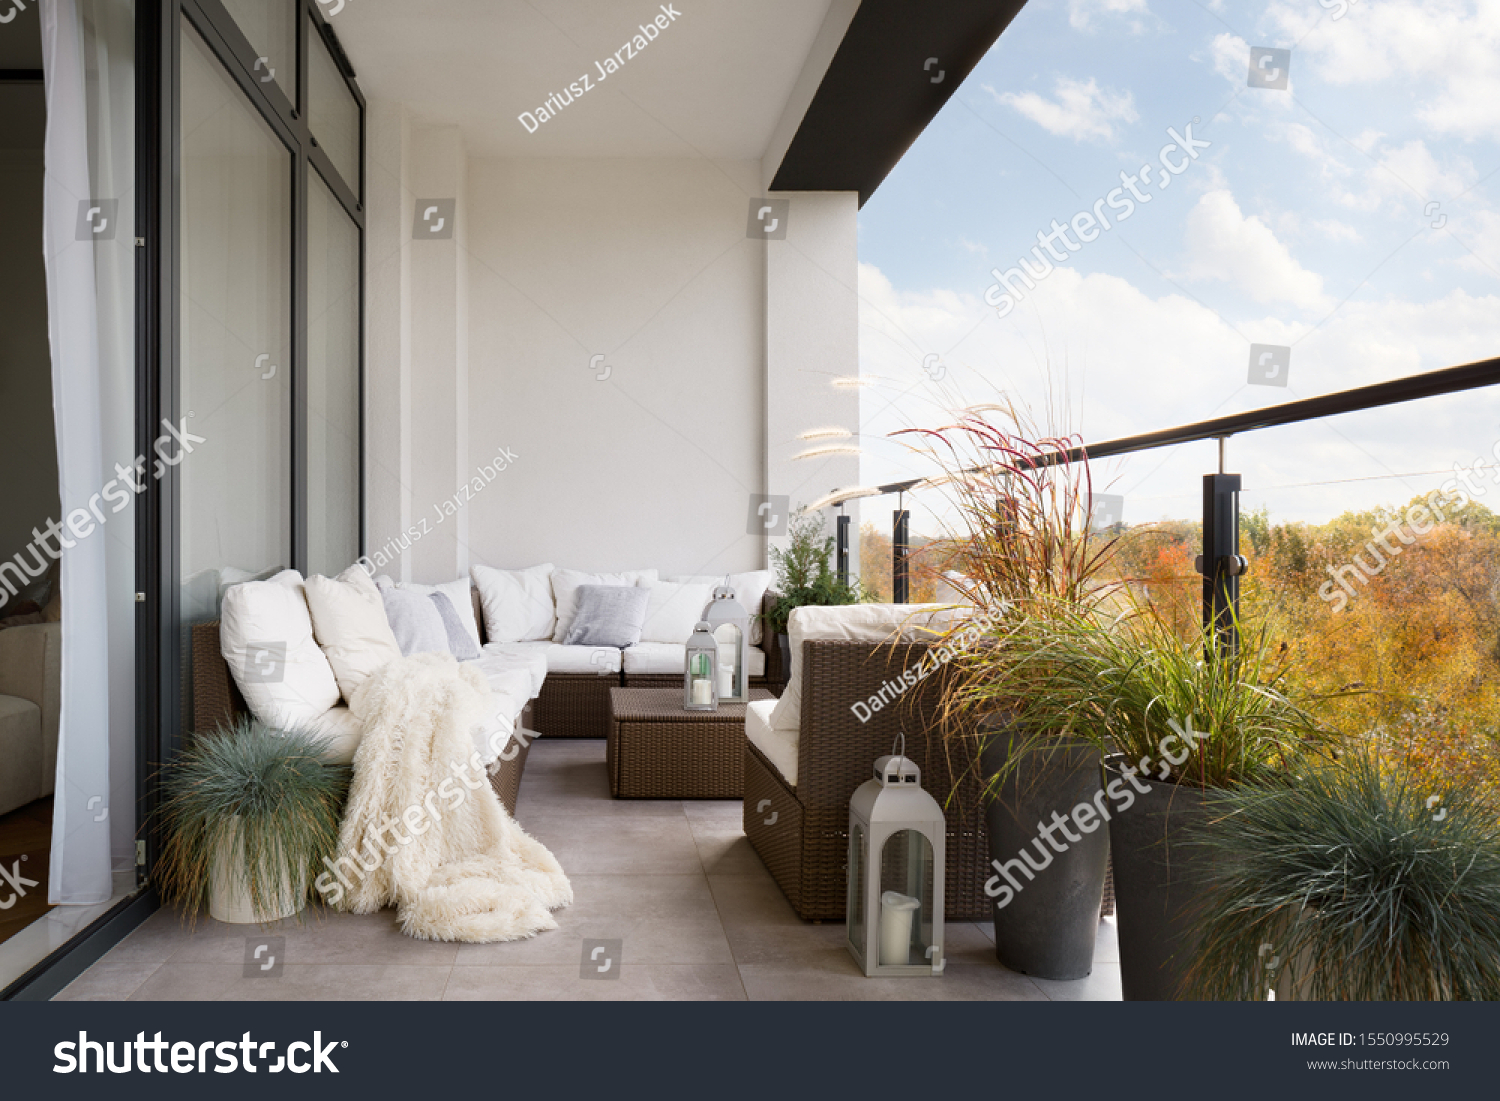 Elegant decorated balcony with rattan outdoor furniture, bright pillows and plants #1550995529